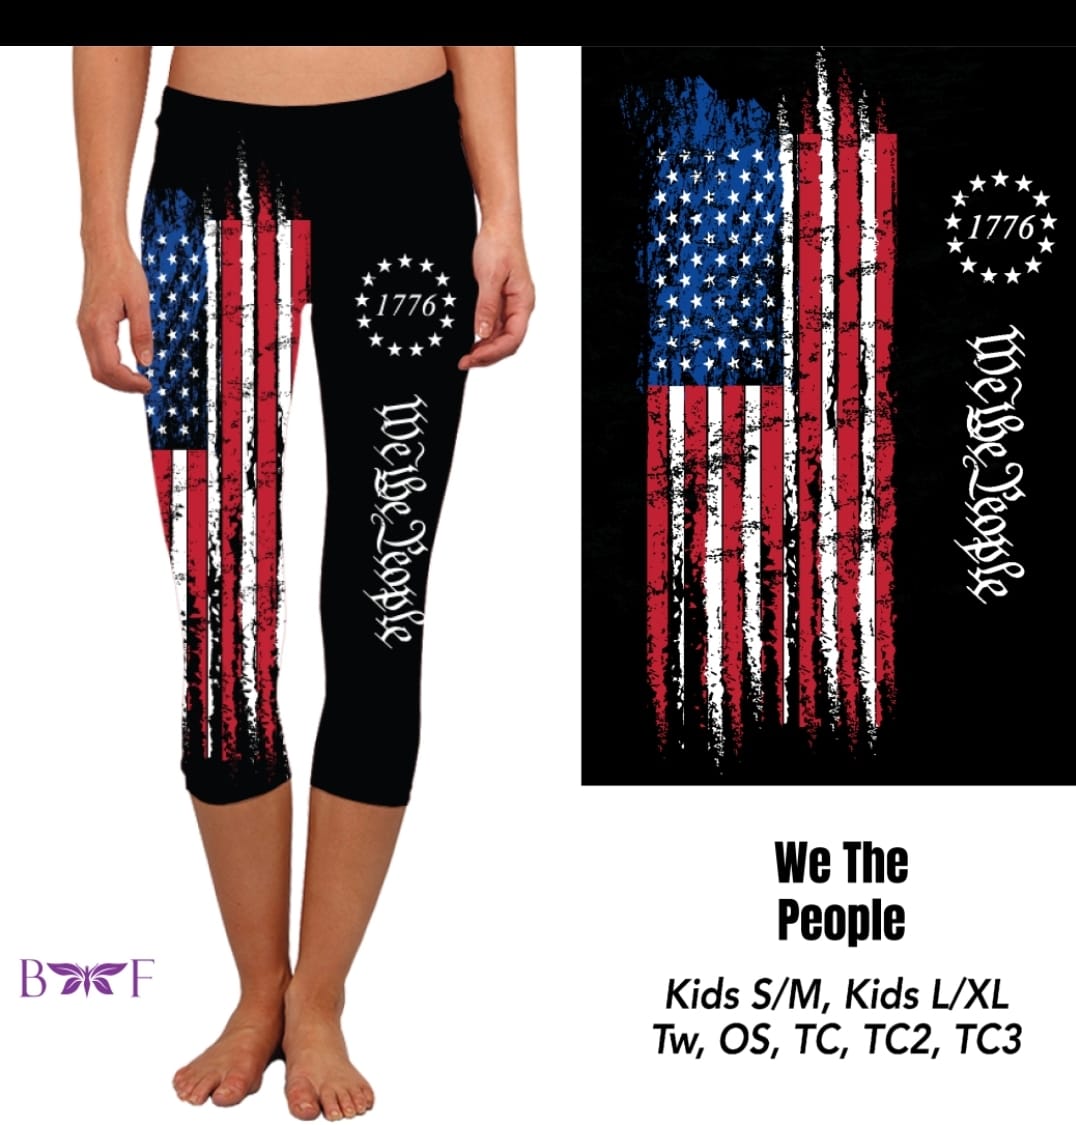 We The People Leggings and Petite Lounge Pants